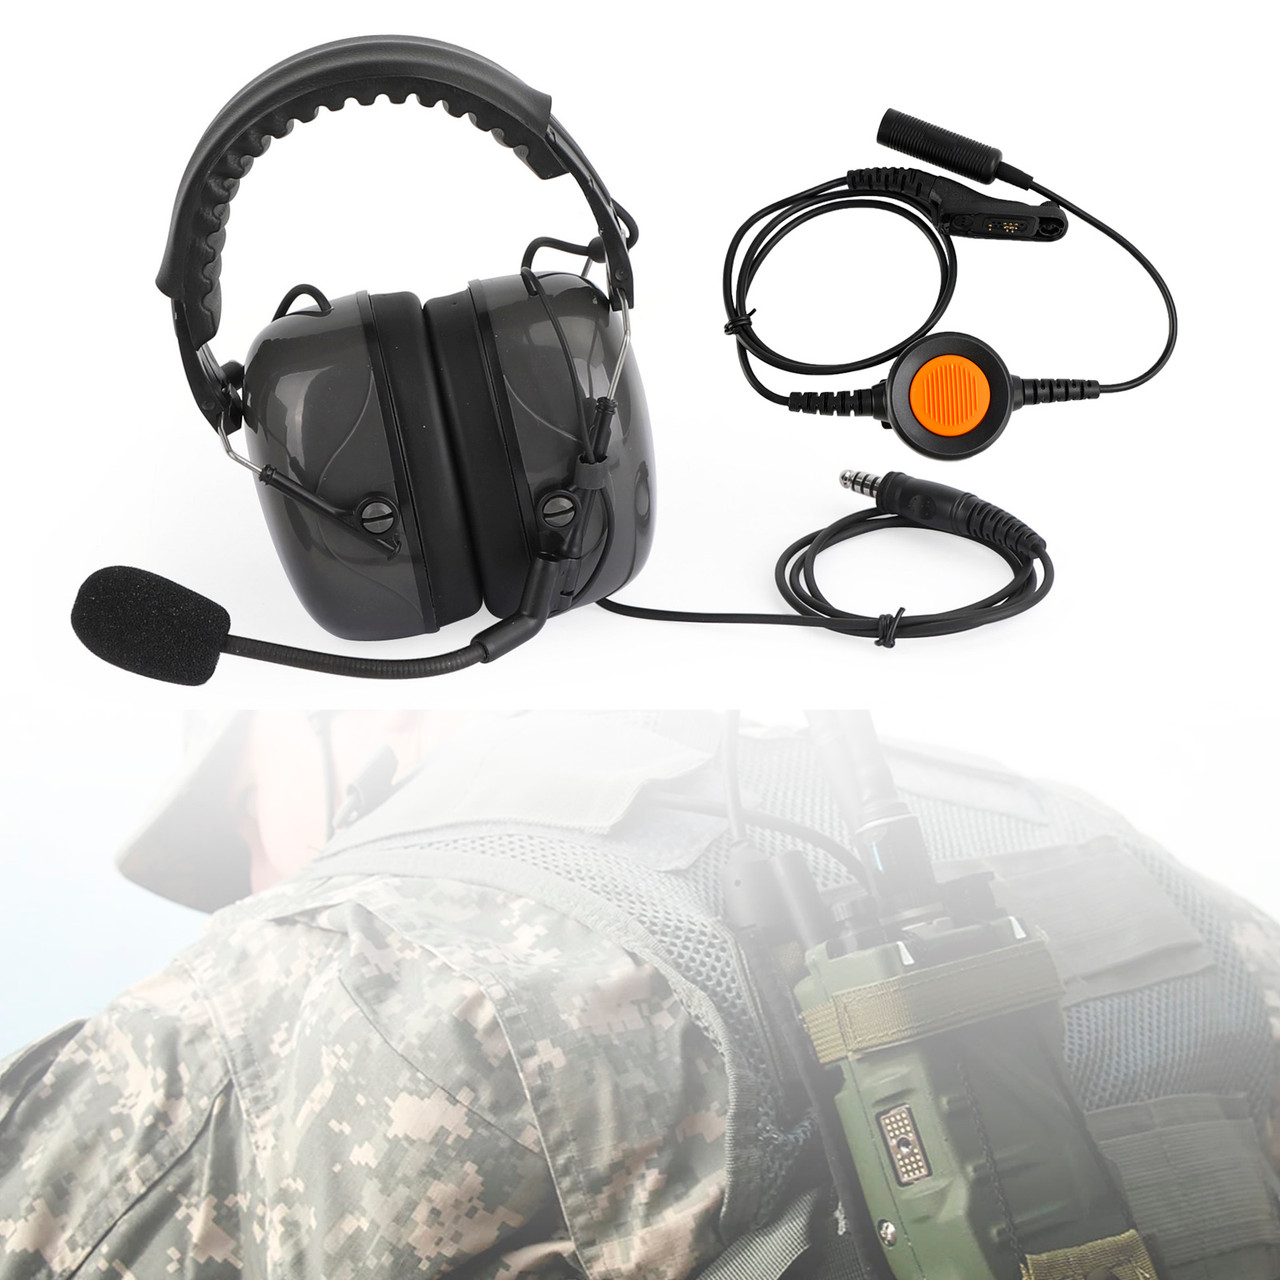 7.1-C5 Adjustable Noise Cancelling Headset For XPR6300 XPR6350 XPR6380 XPR6500